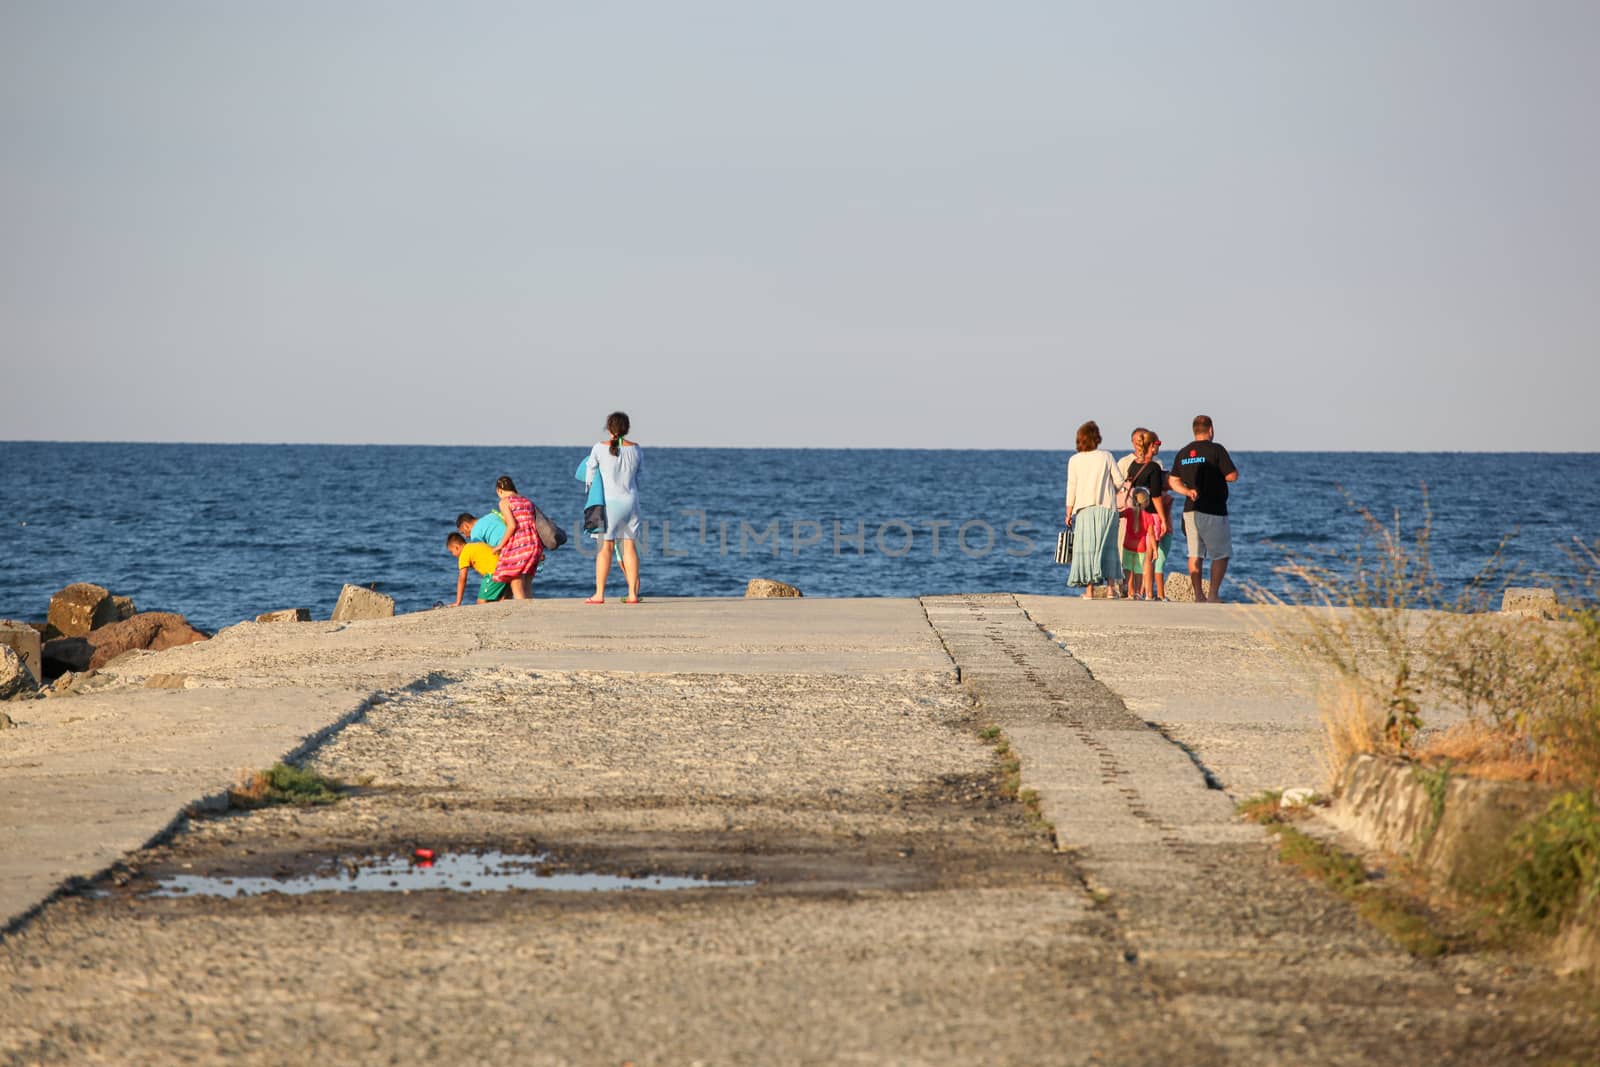 Pomorie, Bulgaria - July 12, 2019: People Relaxing On The Beach.